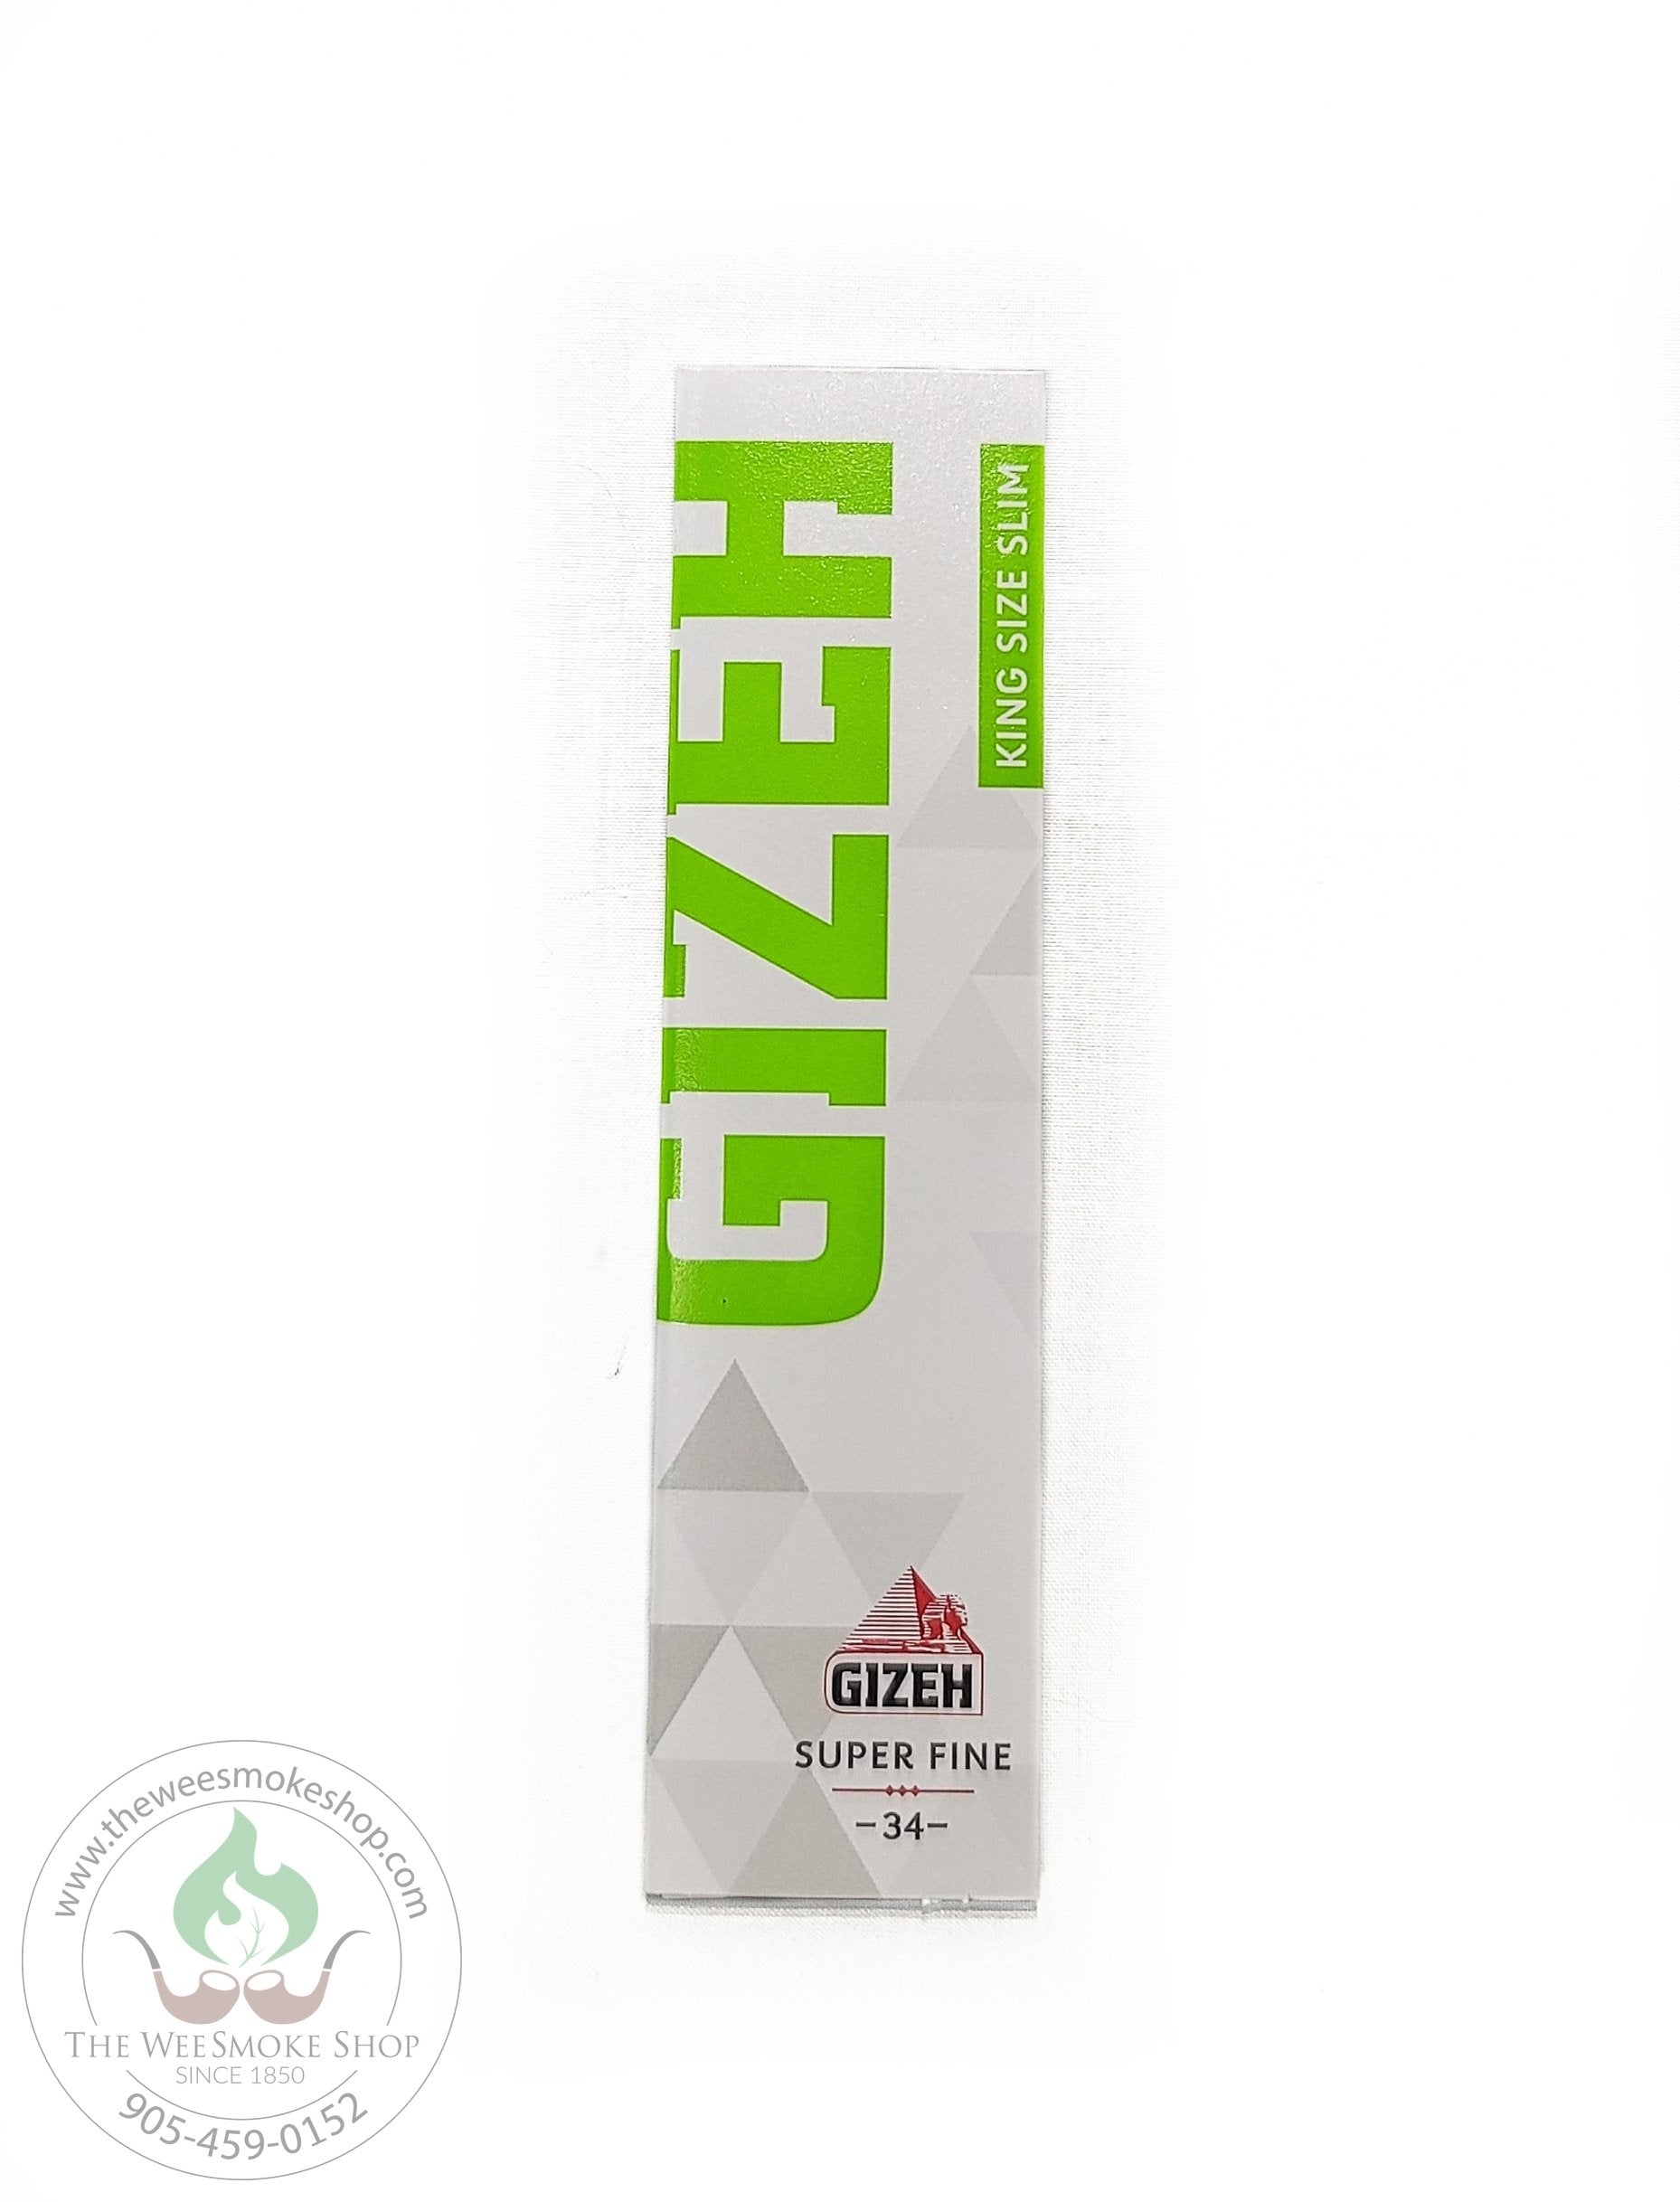 Gizeh Super Fine Rolling Papers. Green and white pack. King size slim The Wee Smoke Shop